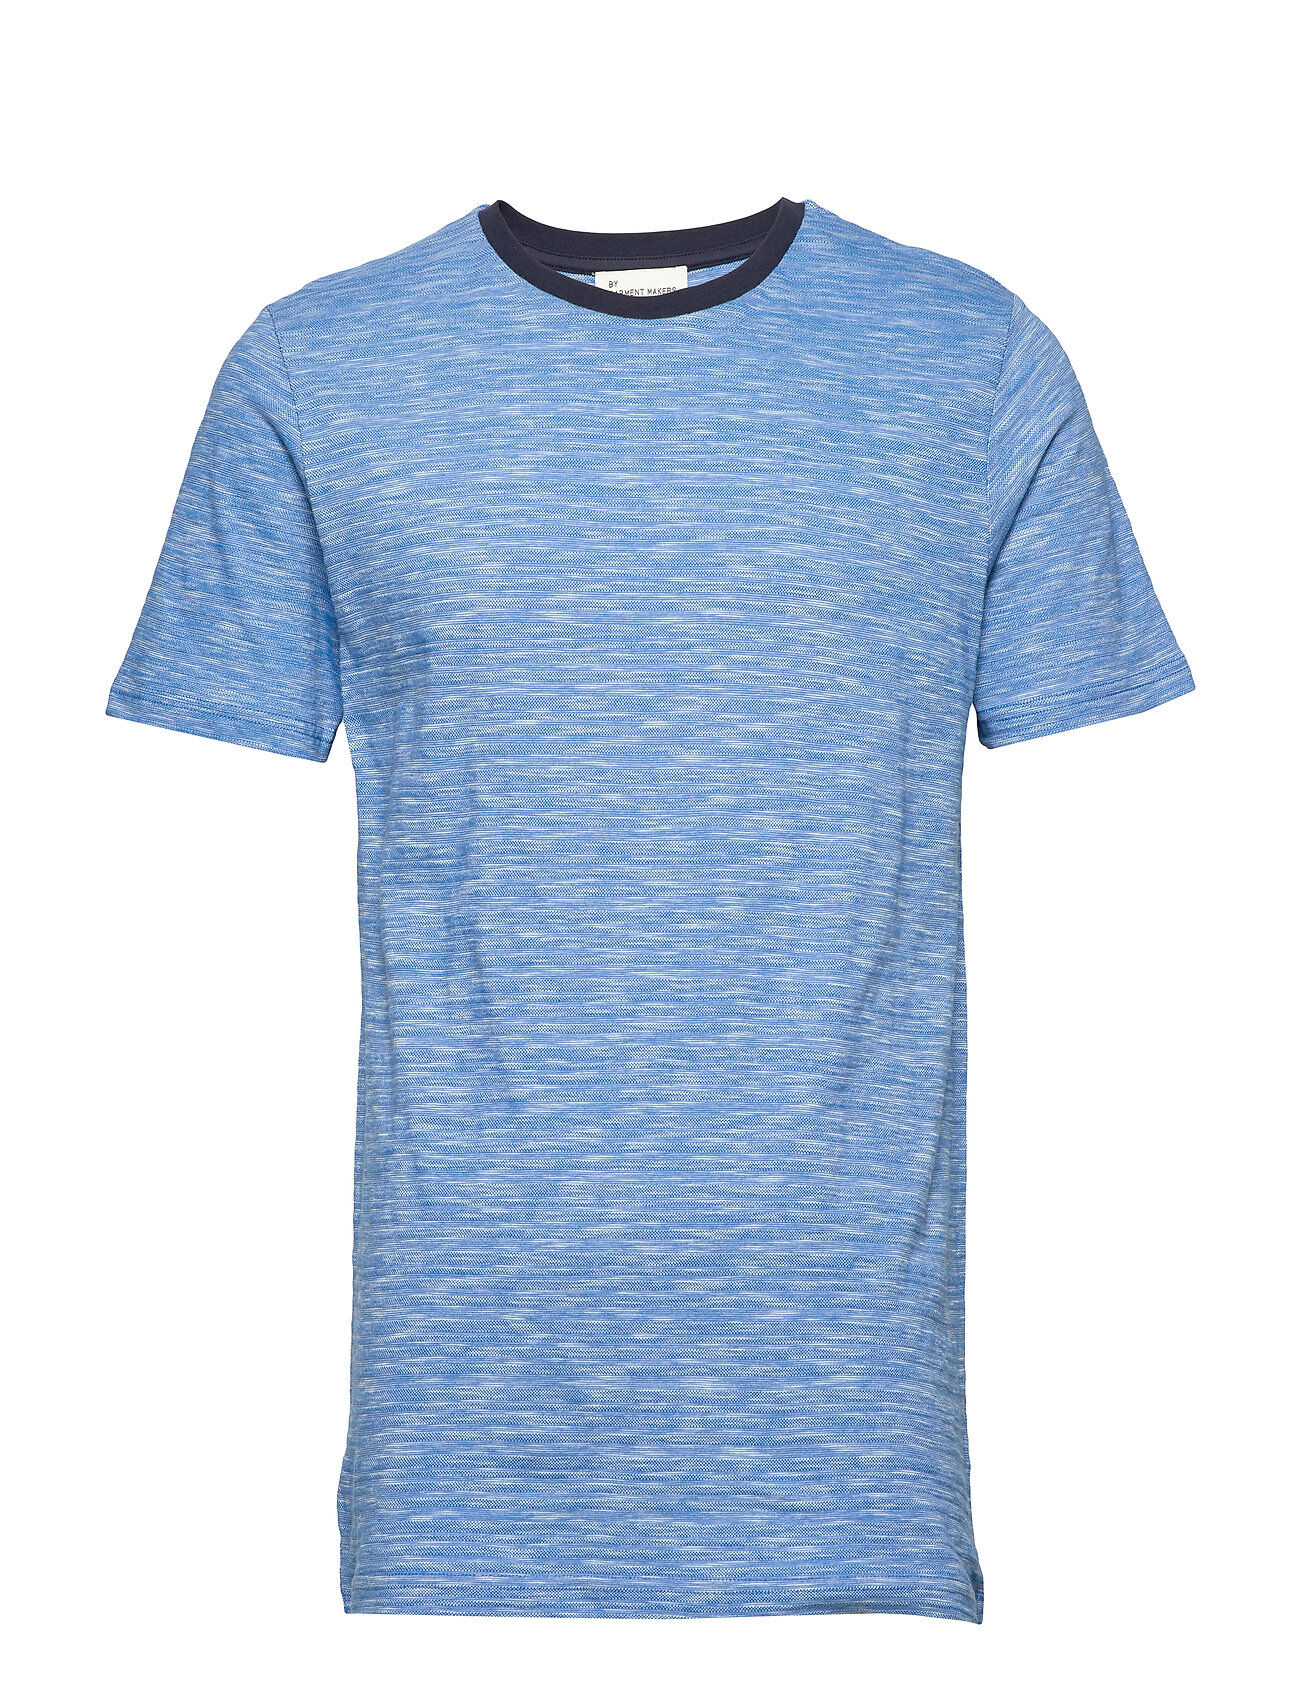 By Garment Makers The Organic Sporty Tee T-shirts Short-sleeved Blå By Garment Makers